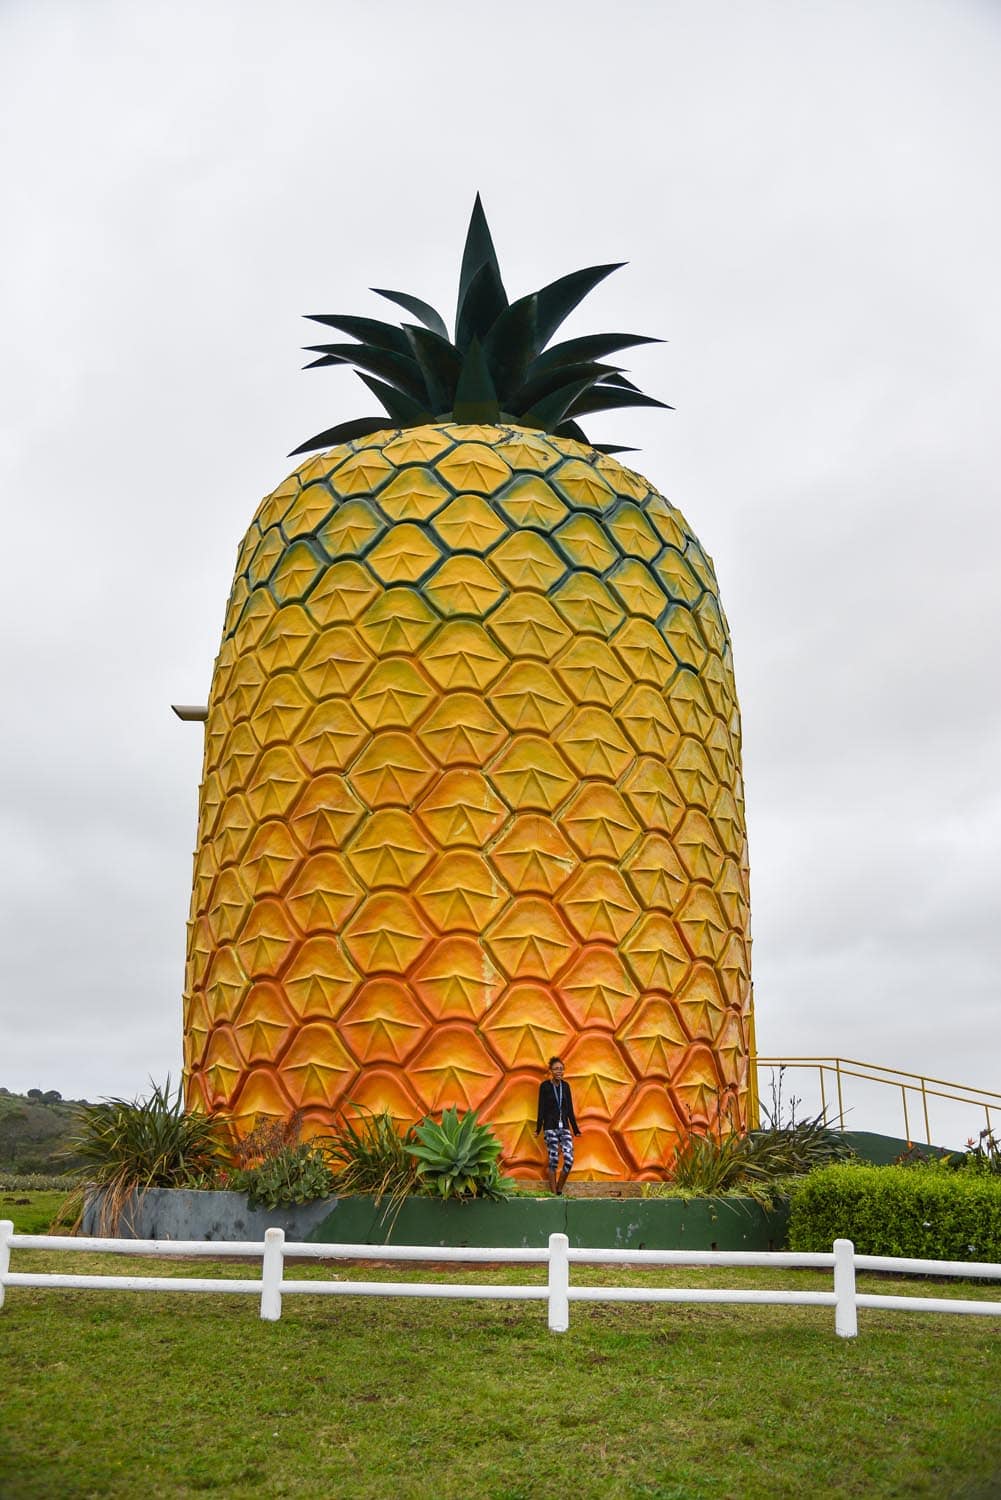 Pineapple Farm, Things to do in Eastern Cape